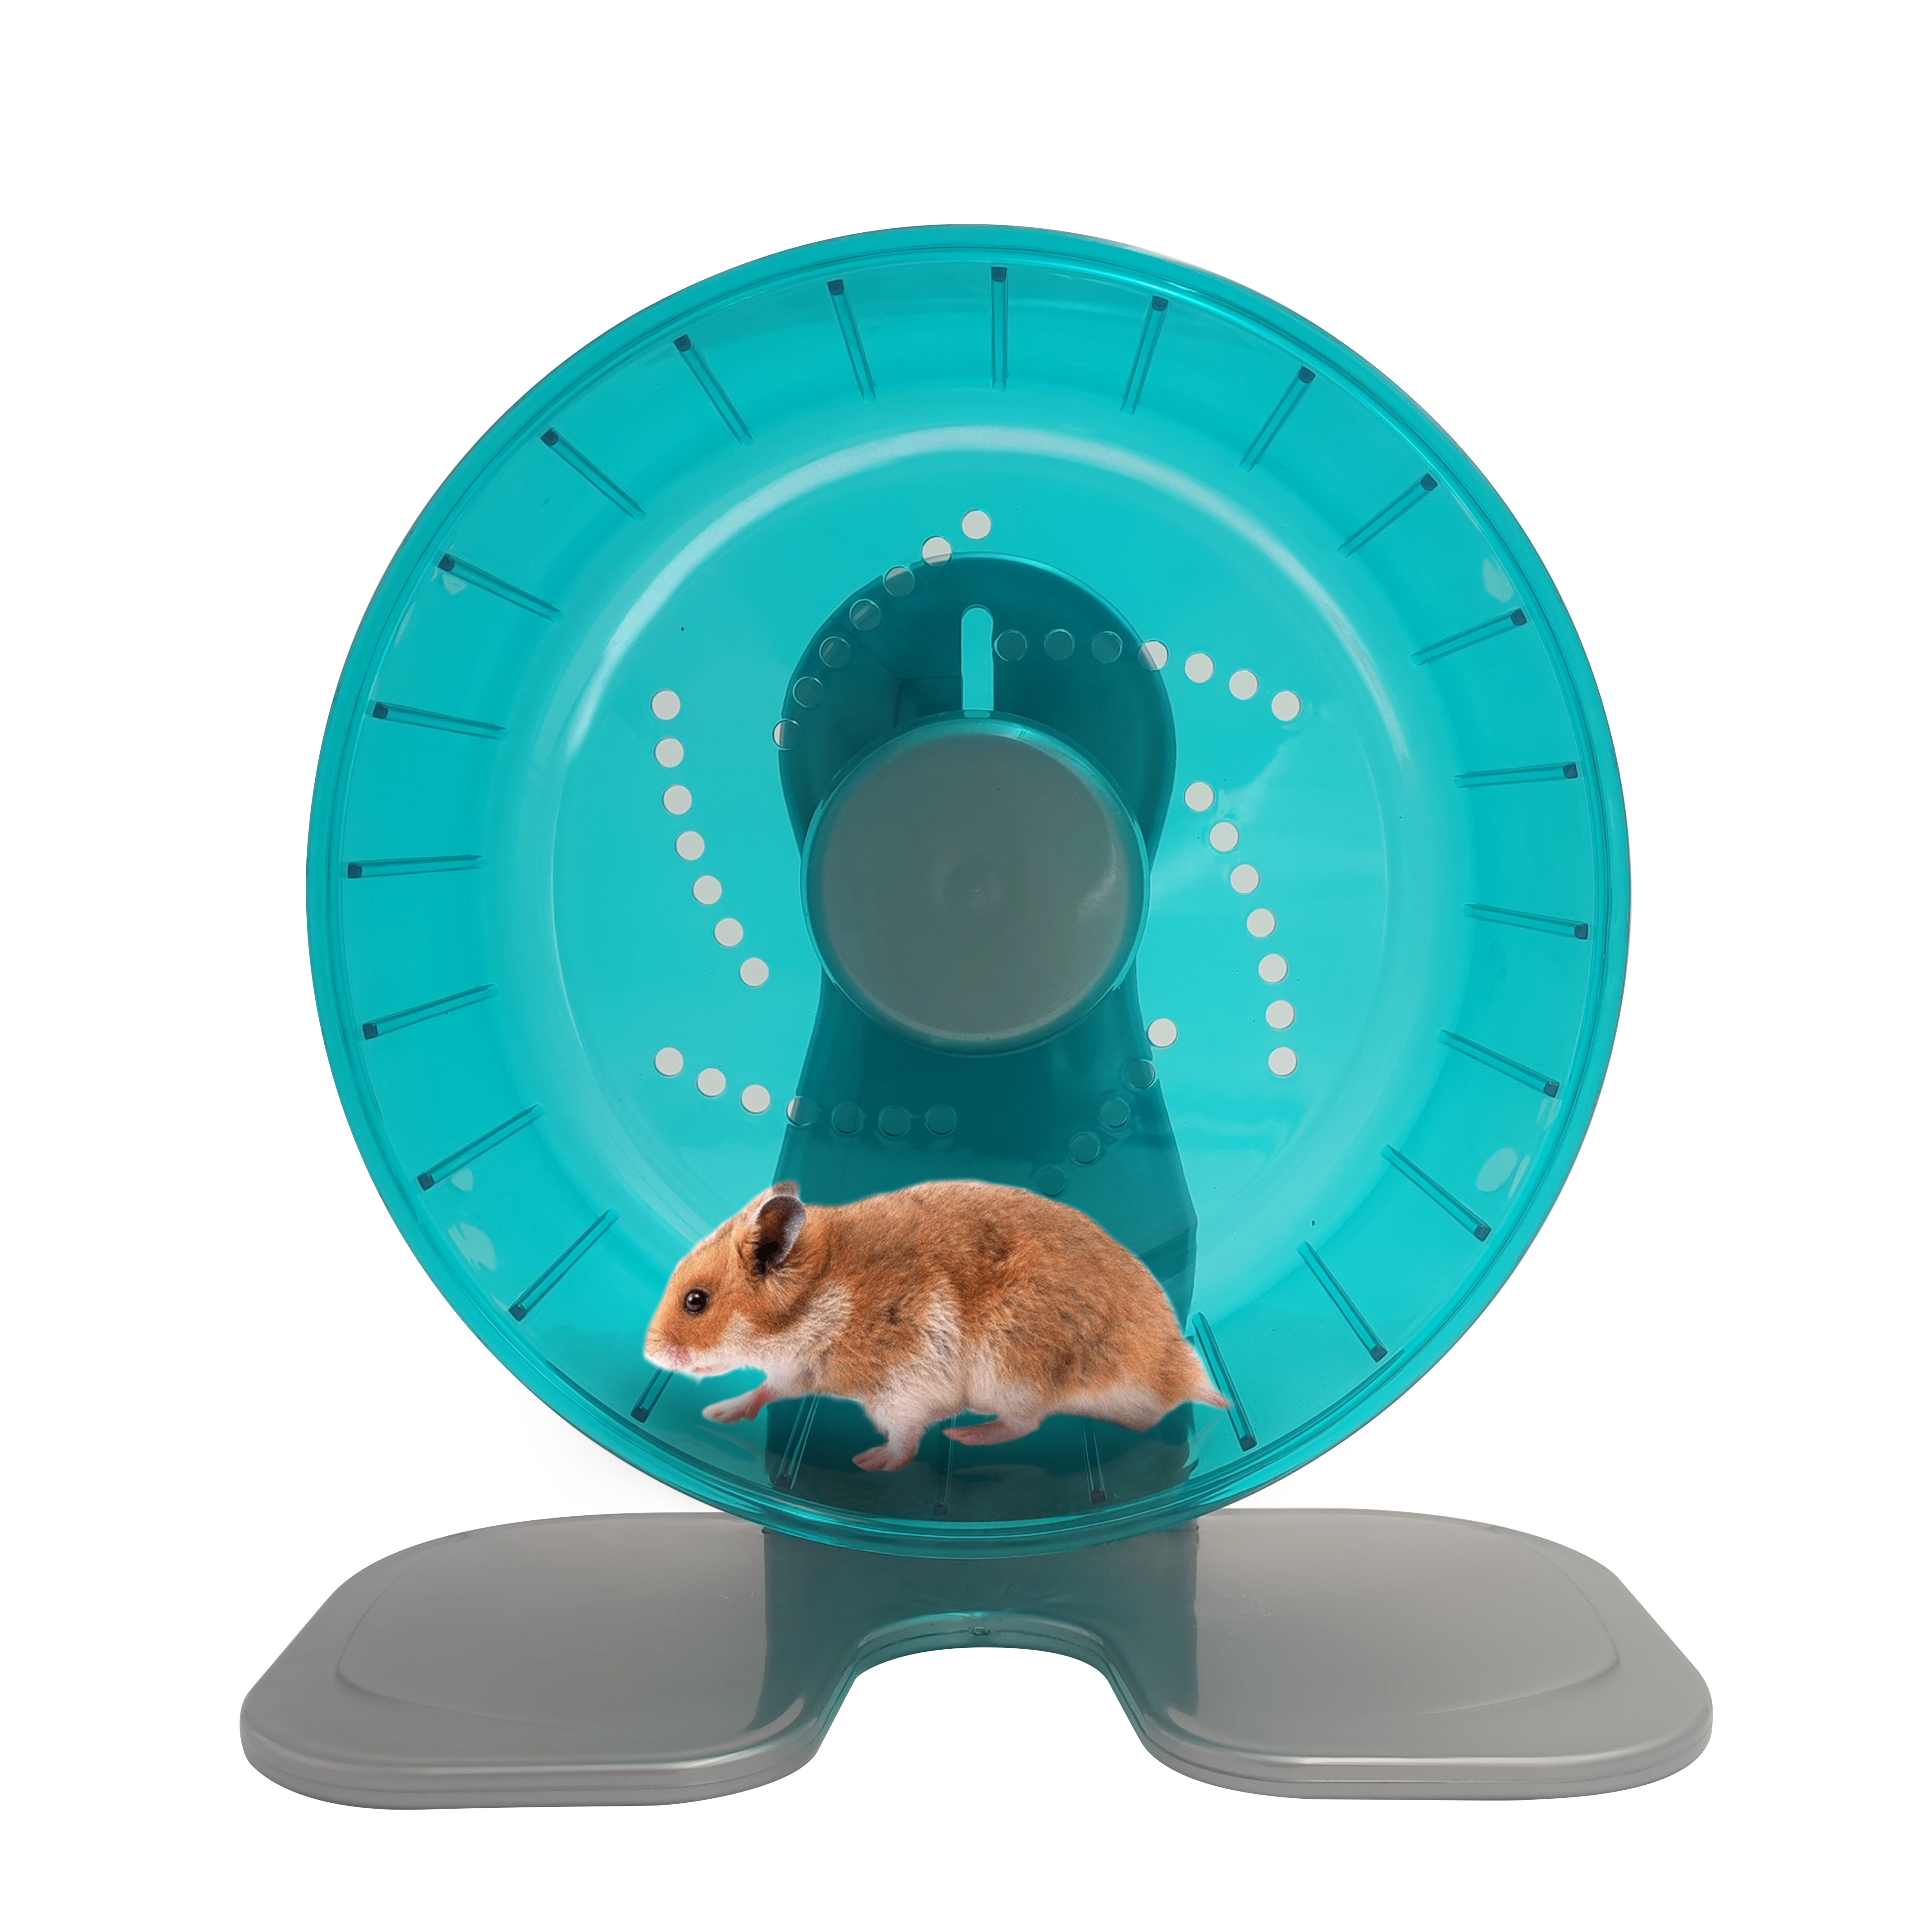 What's your top speed on the hamster wheel 🐹? Don't blink! It's Speed  Simulator X time 🏃🏽‍♀️🏃🏽‍♂️💨  By  Roblox